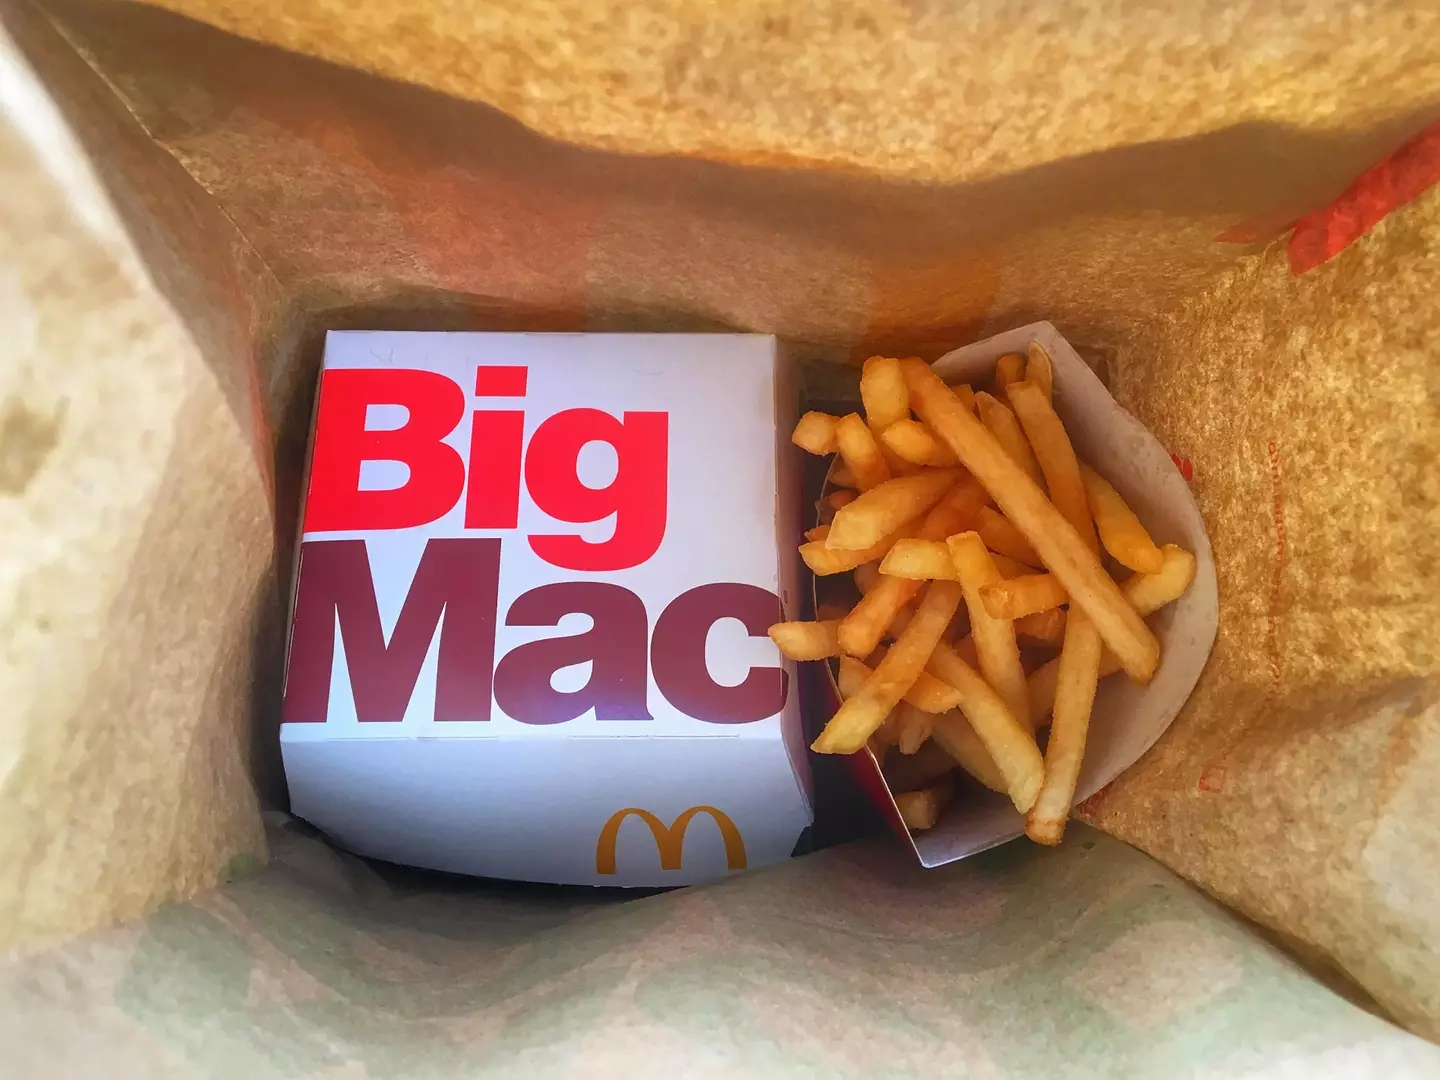 If a Big Mac isn't your thing, you can also claim either Fillet-O-Fish, or a Vegetable Deluxe instead.